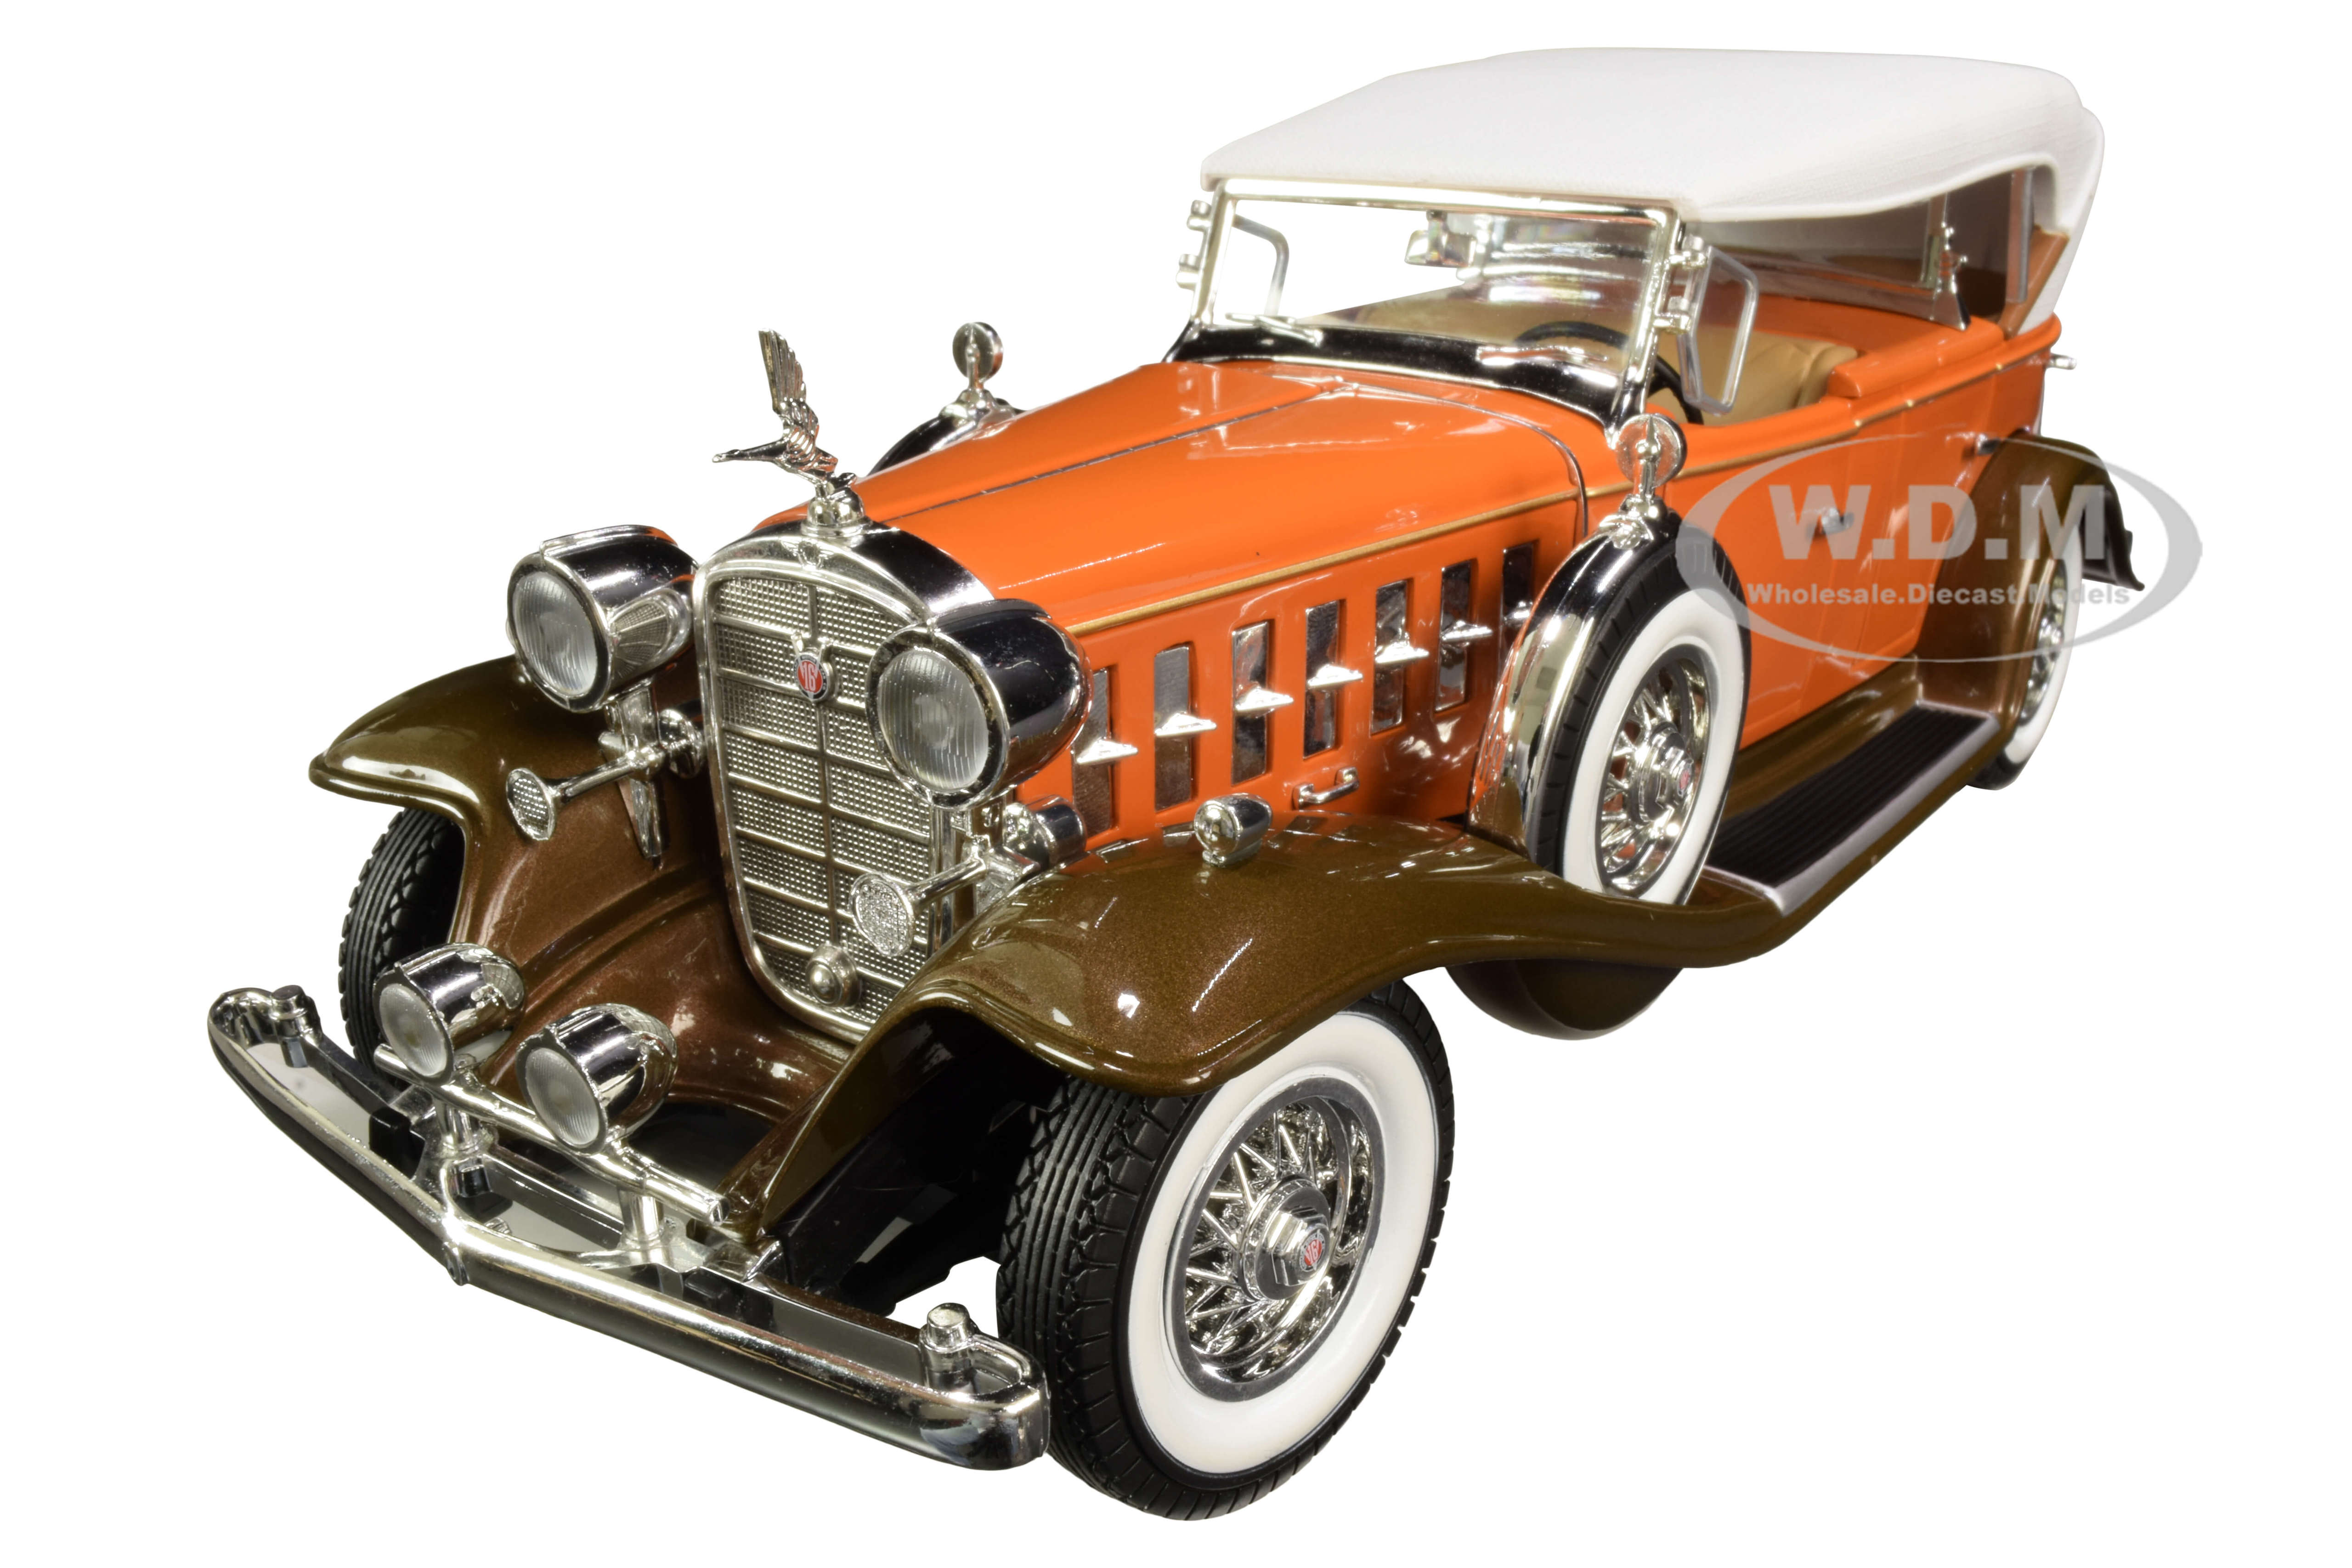 1932 Cadillac V16 Sports Phaeton Convertible Orange with White Top 1/18 Diecast Model Car by Autoworld